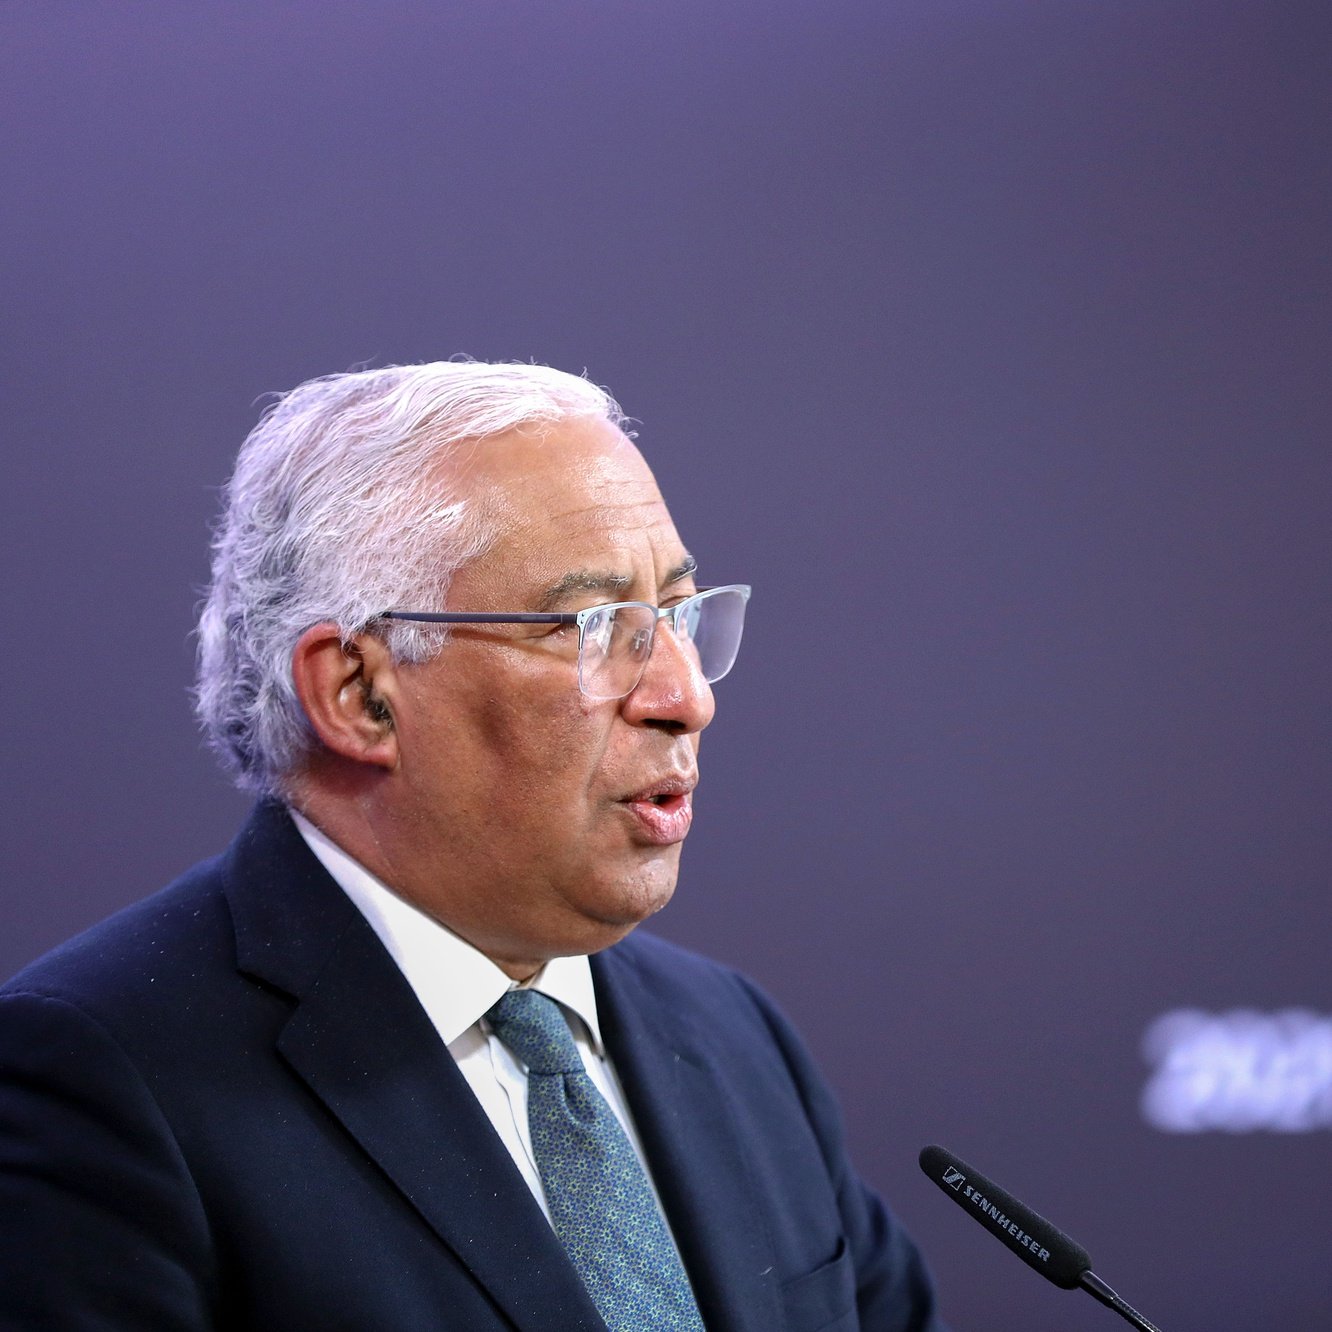 Portuguese Prime Minister Antonio Costa attends to a press conference after a two days video conference of the members of the European Council to discuss the current situation of the COVID-19 pandemic, preparedness for health threats, security and defence, and relations with the Southern Neighbourhood, in Lisbon, Portugal, 26 February 2021.  ANTONIO PEDRO SANTOS/LUSA